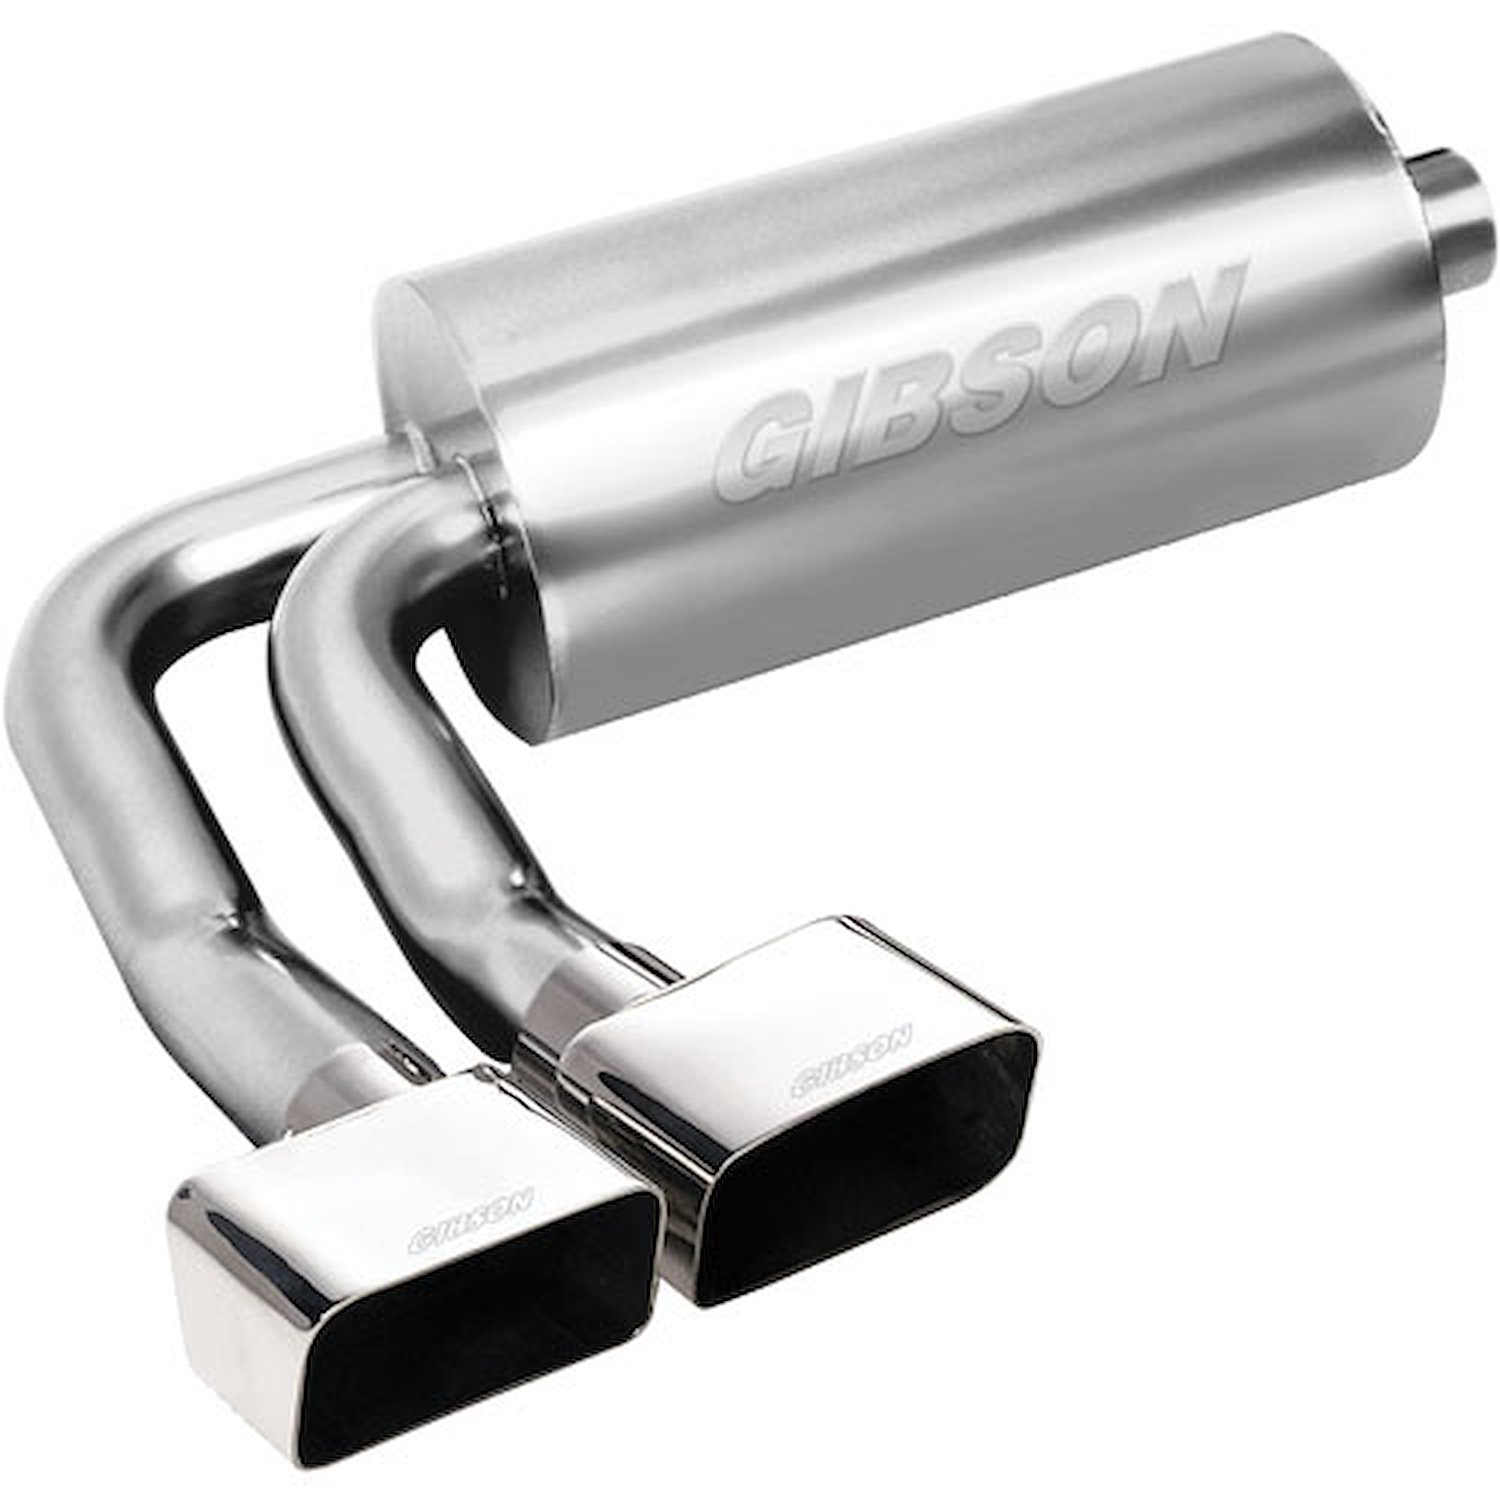 Super Truck Stainless Steel Cat-Back Exhaust 2002-06 Silverado/Sierra 1500 & Quad Steer 4.3L/4.8L/5.3L (Extended Cab, Short Bed)